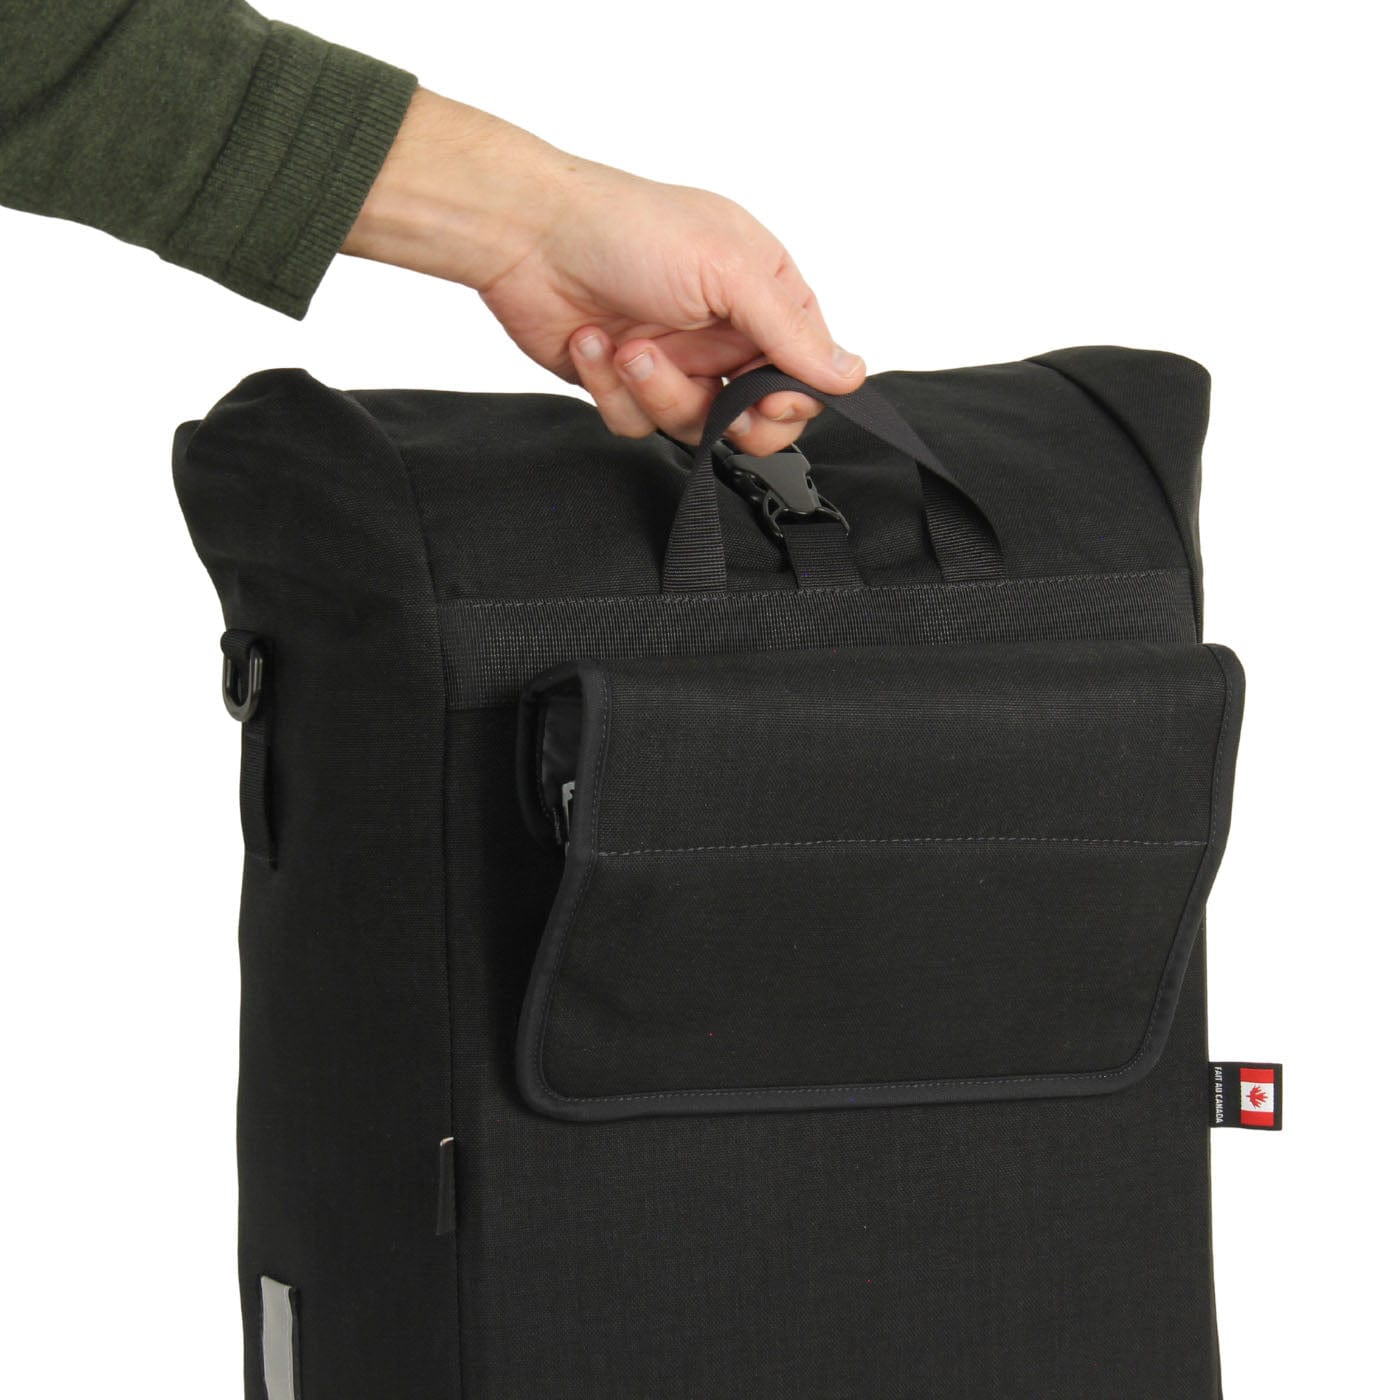 Here you see a practical carry handle that can be used to carry the Signature V waterproof urban laptop pannier  